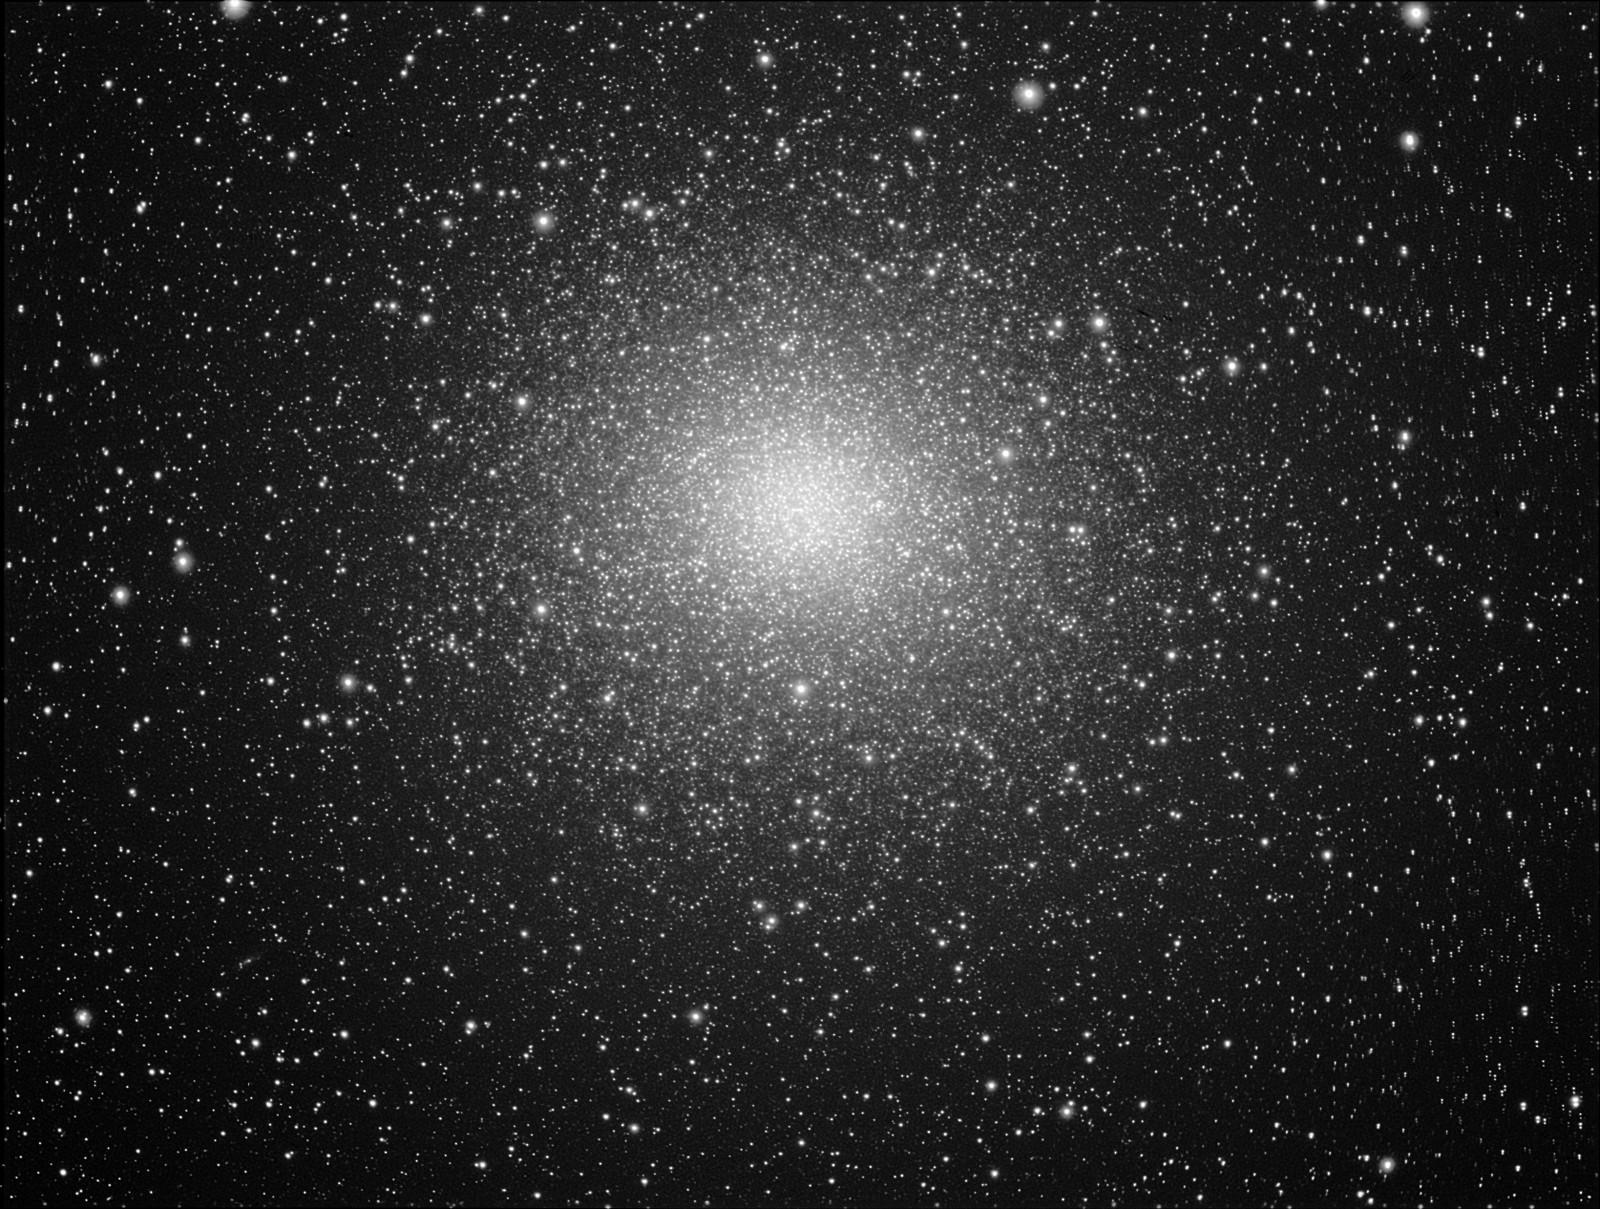 Omega Centauri recorded with SBIG-ST8300 and post processed with CCDSharp